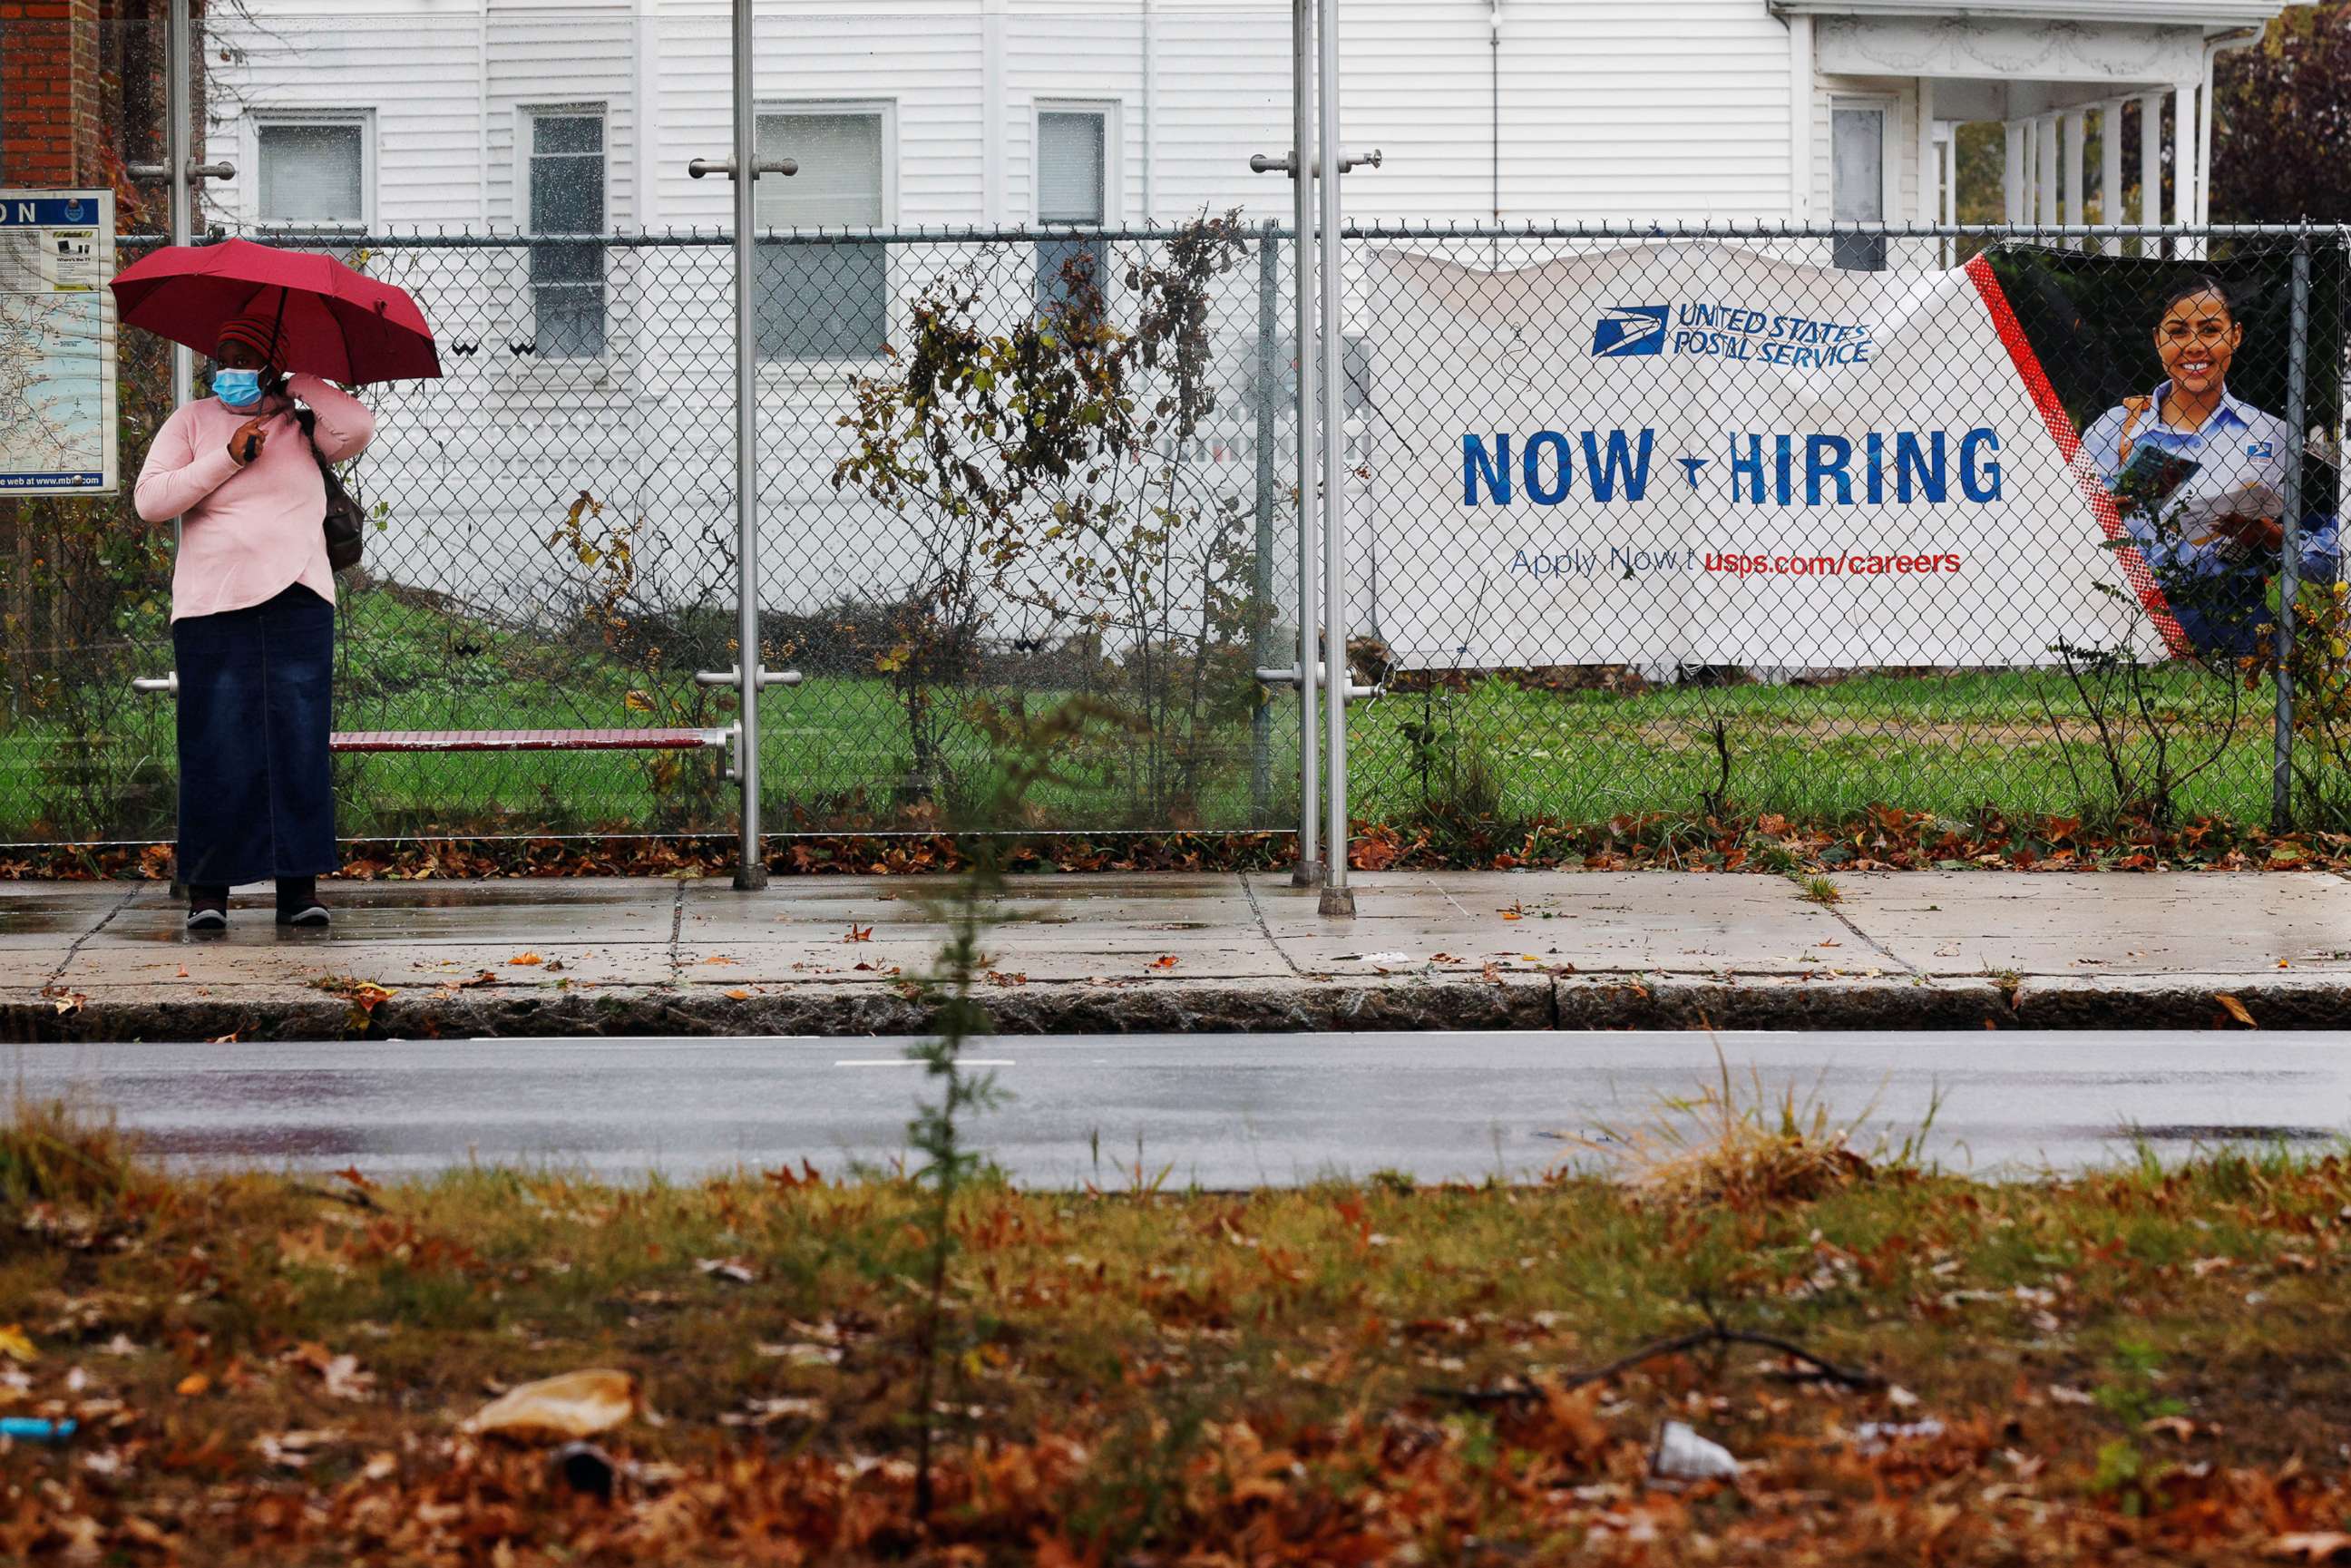 PHOTO: A woman waits for a bus next to a "Now Hiring" sign from the United States Postal Service in Boston, Oct. 30, 2021.